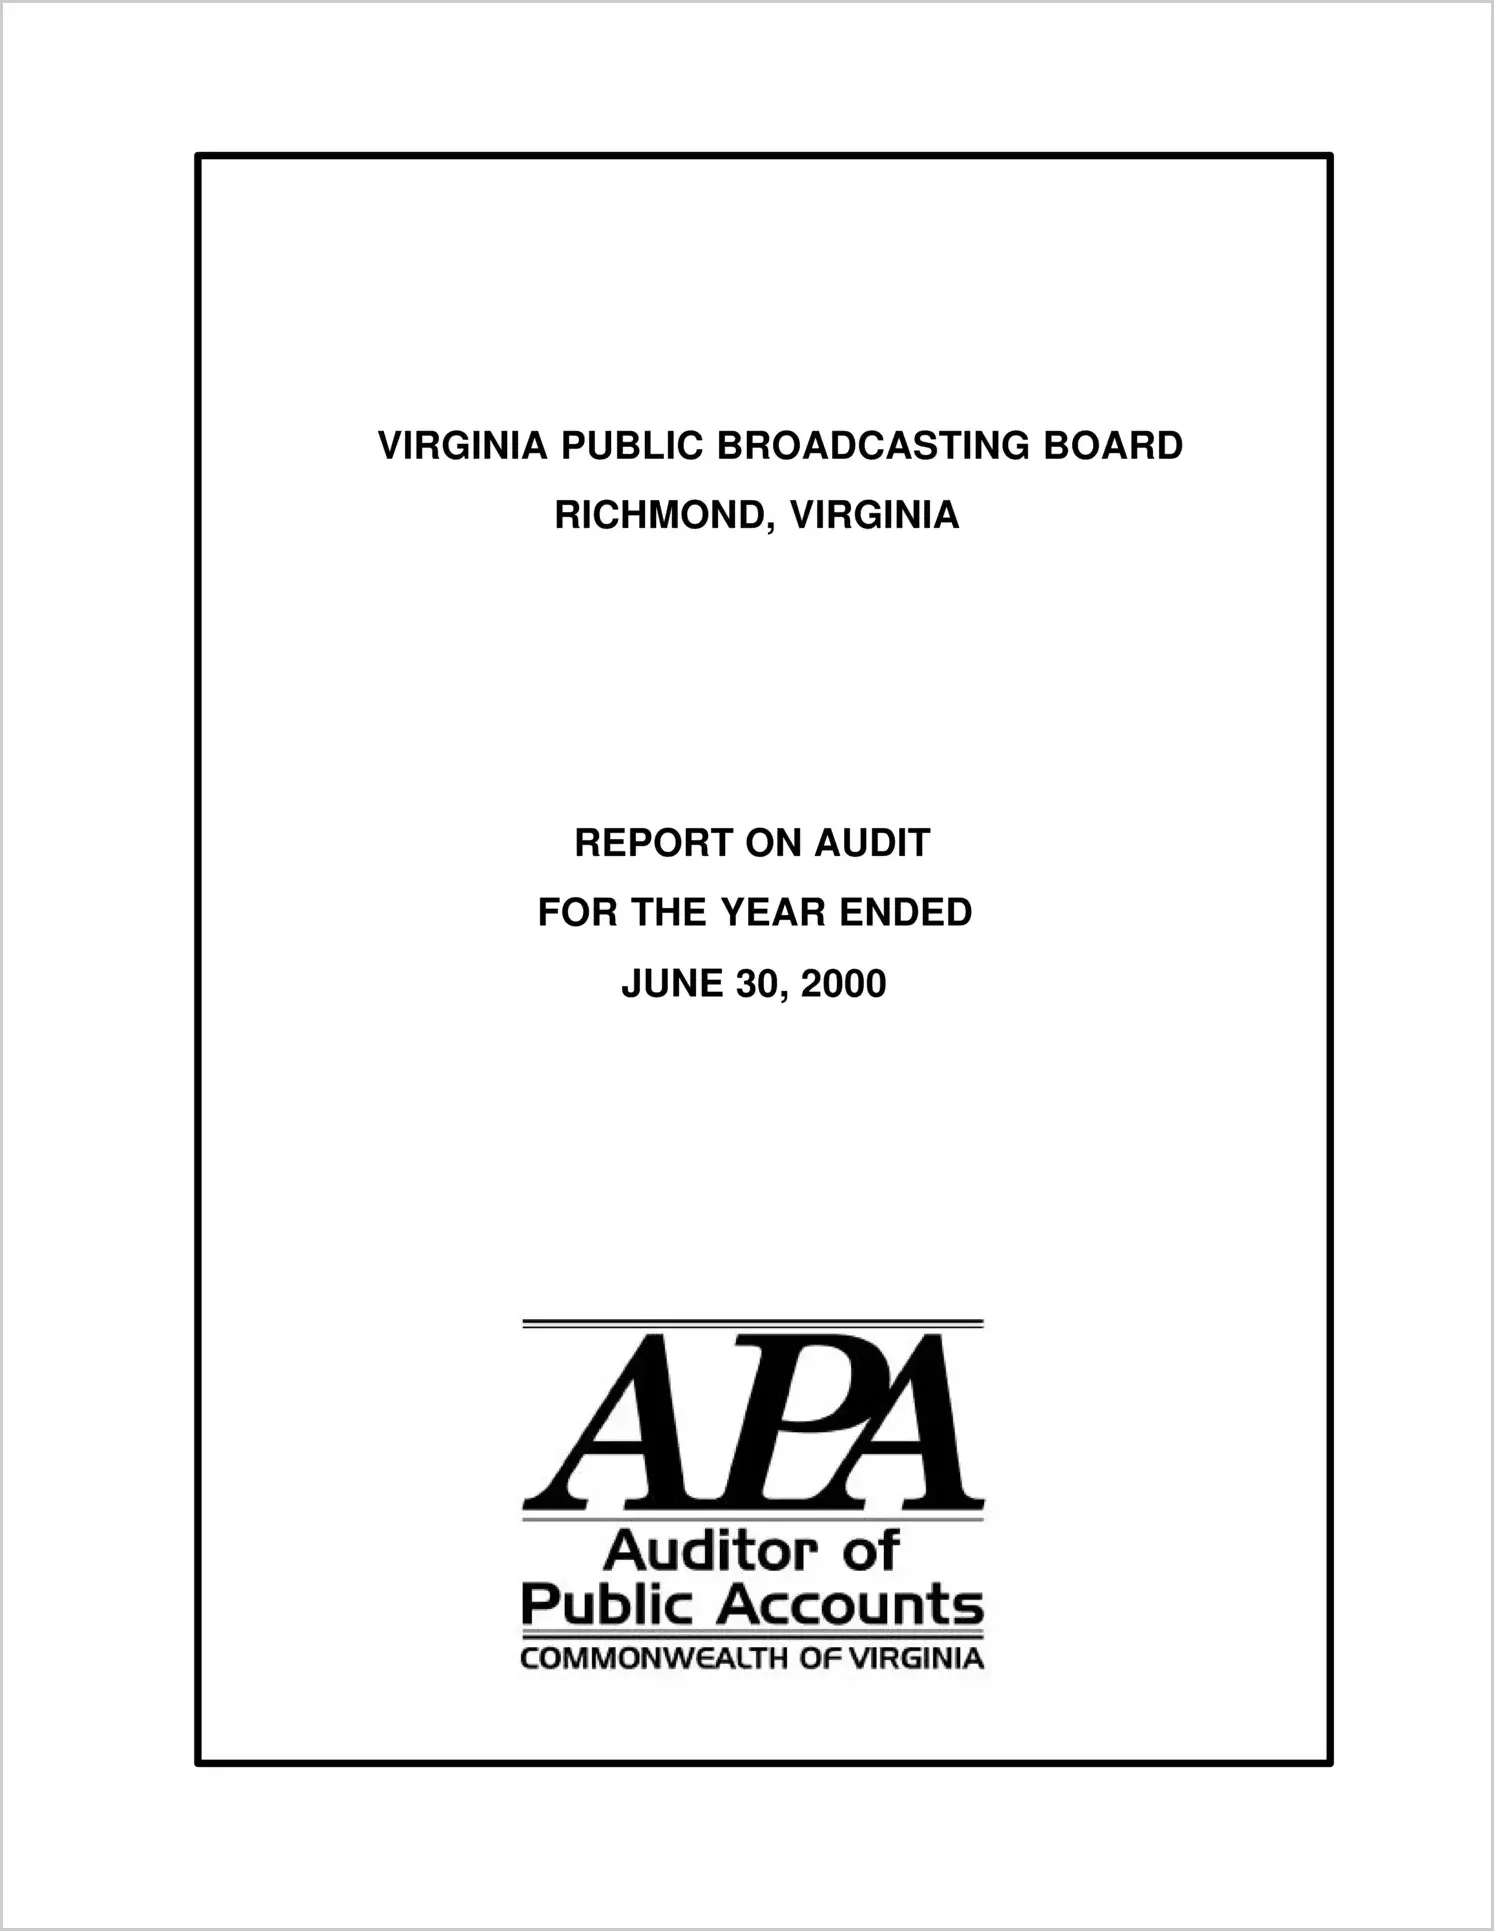 Virginia Public Broadcasting Board for the year ended June 30, 2000